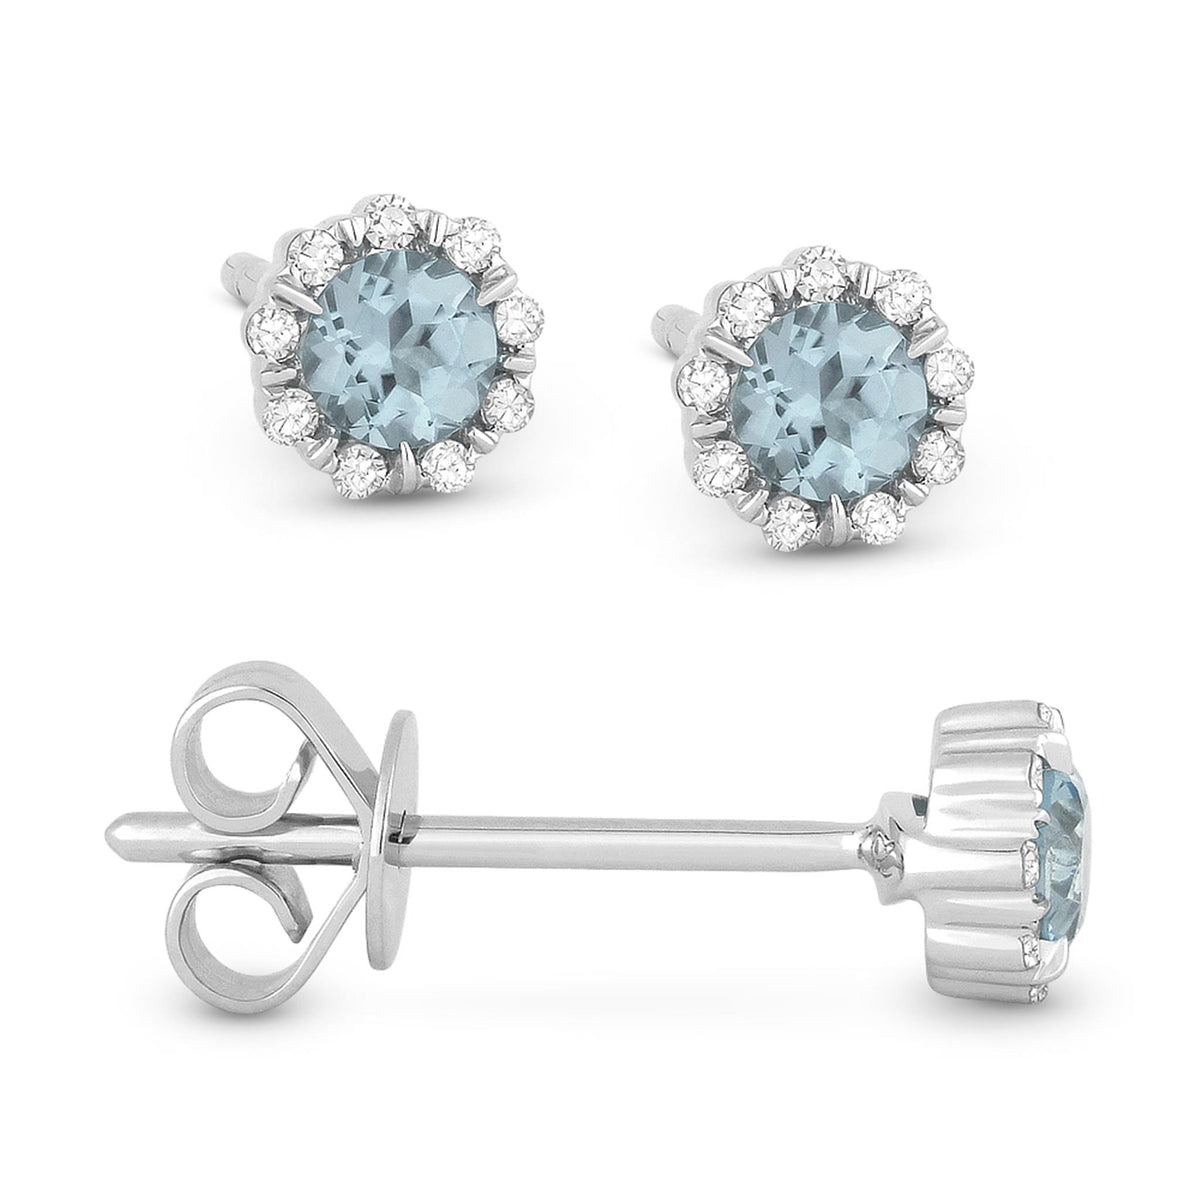 14Kt White Gold Halo Earrings Gemstone Earrings With 0.20ct Aquas